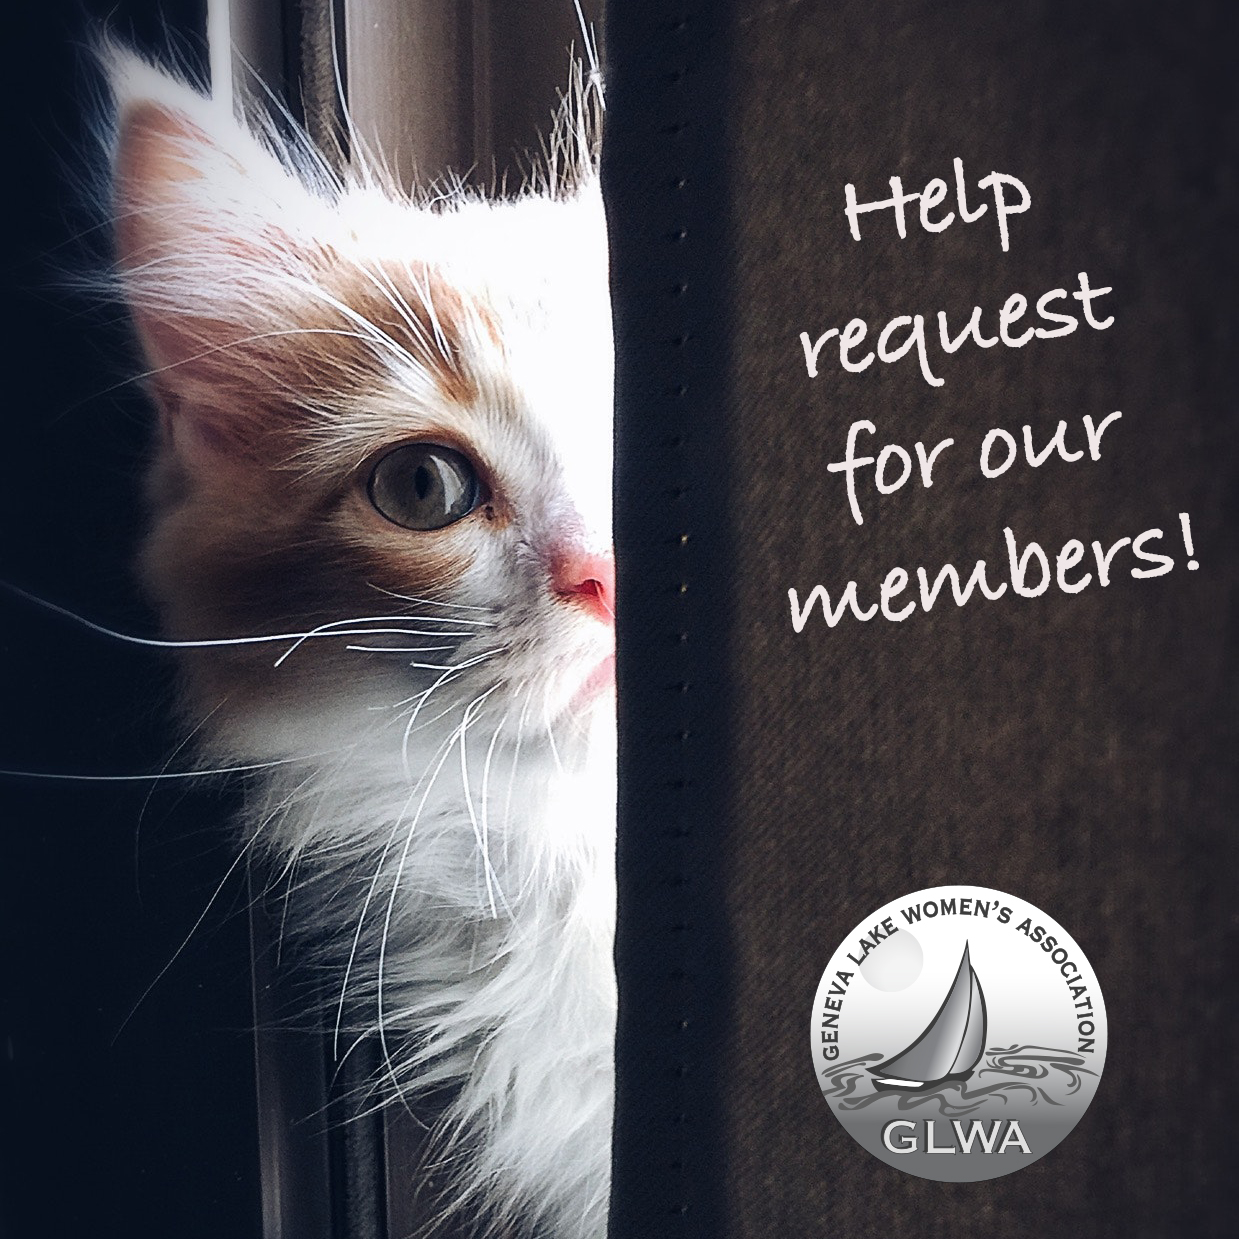 Attention to our GLWA members who will be attending Mondays meeting.
This is just a reminder we emailed two requests earlier this week.

1)  If you have extra plastic grocery bags handy, please bring to meeting.  The Walworth County Food Pantry and Diaper Bank is running low.

2)  Lakeland Animal Shelter has several needs: Currently, they can use bleach, kitty litter (all kinds, clay, etc) and dry cat food (no red dye--causes stomach issues i.e. vomiting & diarrhea). They said Purina Kitty Chow is one brand. 

If you are able to bring one (or more) of these items to our Monday night meeting, it is much appreciated. Thank-you!

Cute kitty pic for attention :)